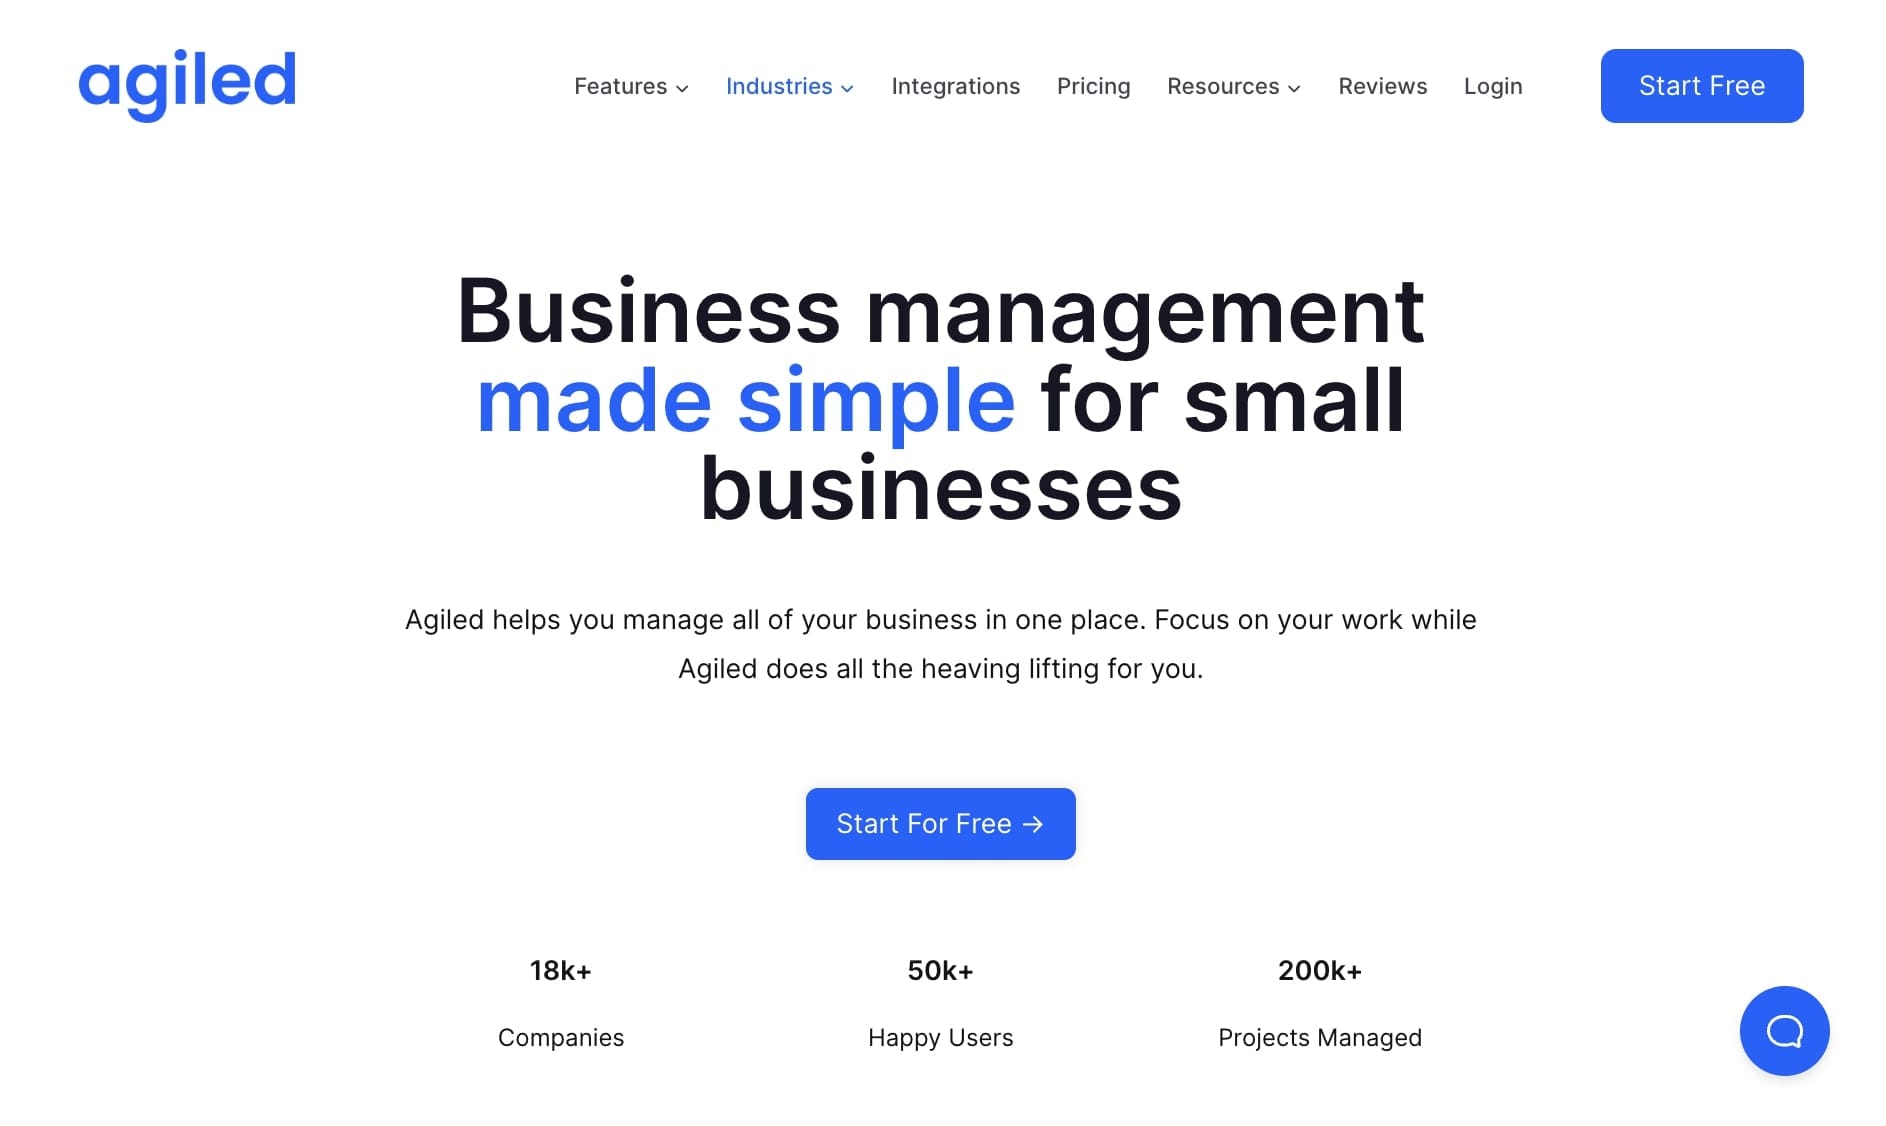 Agiled business management software